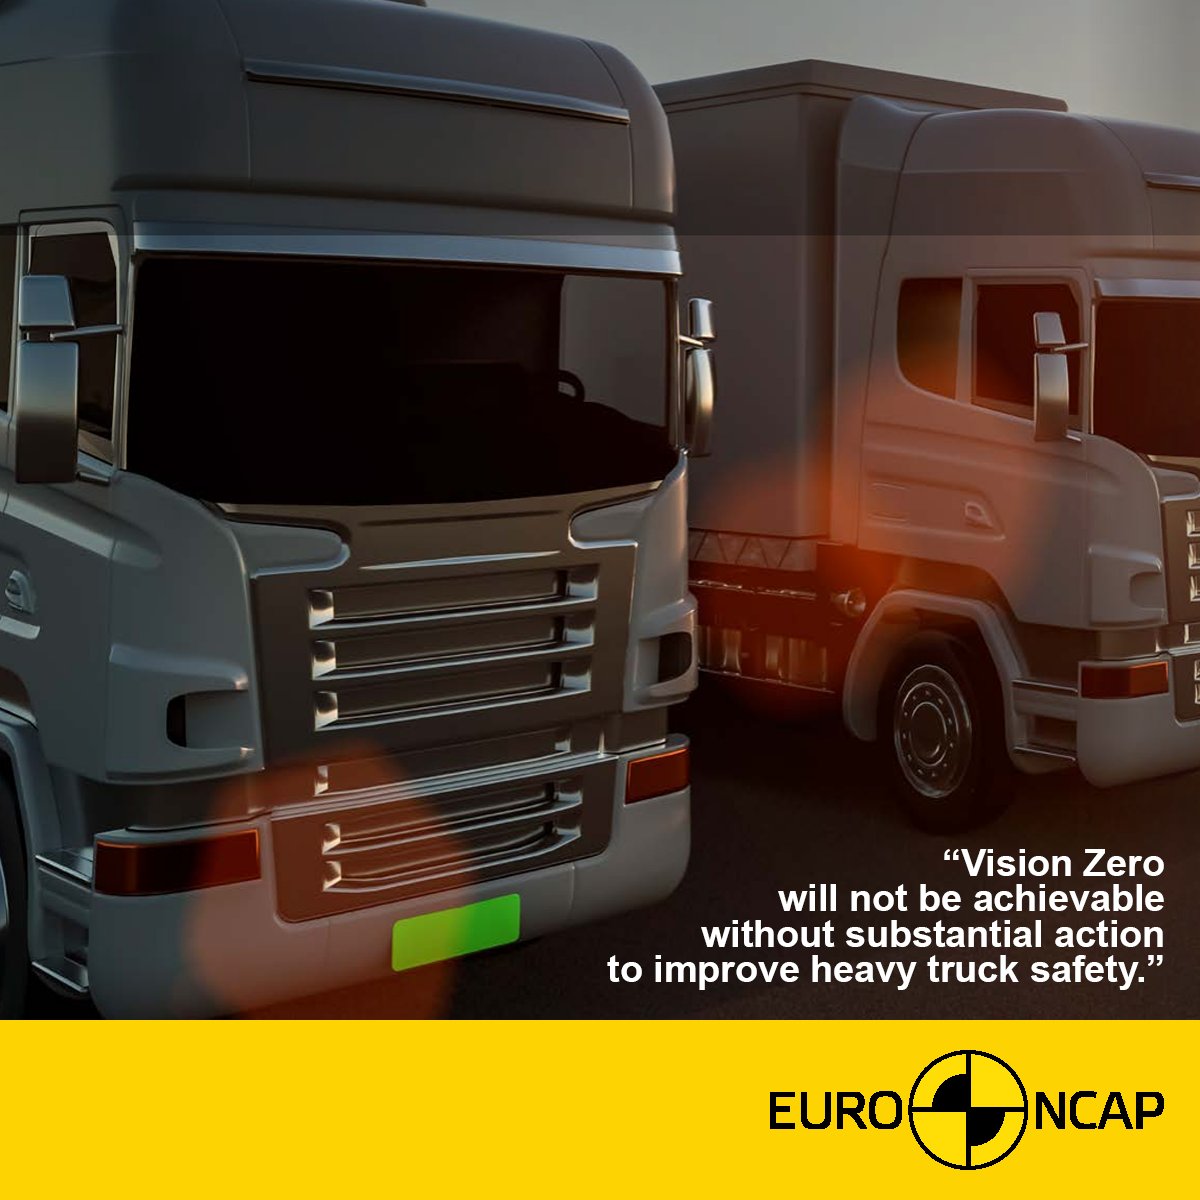 🚚 #VisionZero demands heavy truck safety 🚚

Originally assessing cars and commercial vans, Euro NCAP now addresses the challenges presented by trucks on our roads. 

Read the full report 👉 bit.ly/2304TR

#forsafertrucks #trucksafety #trucks